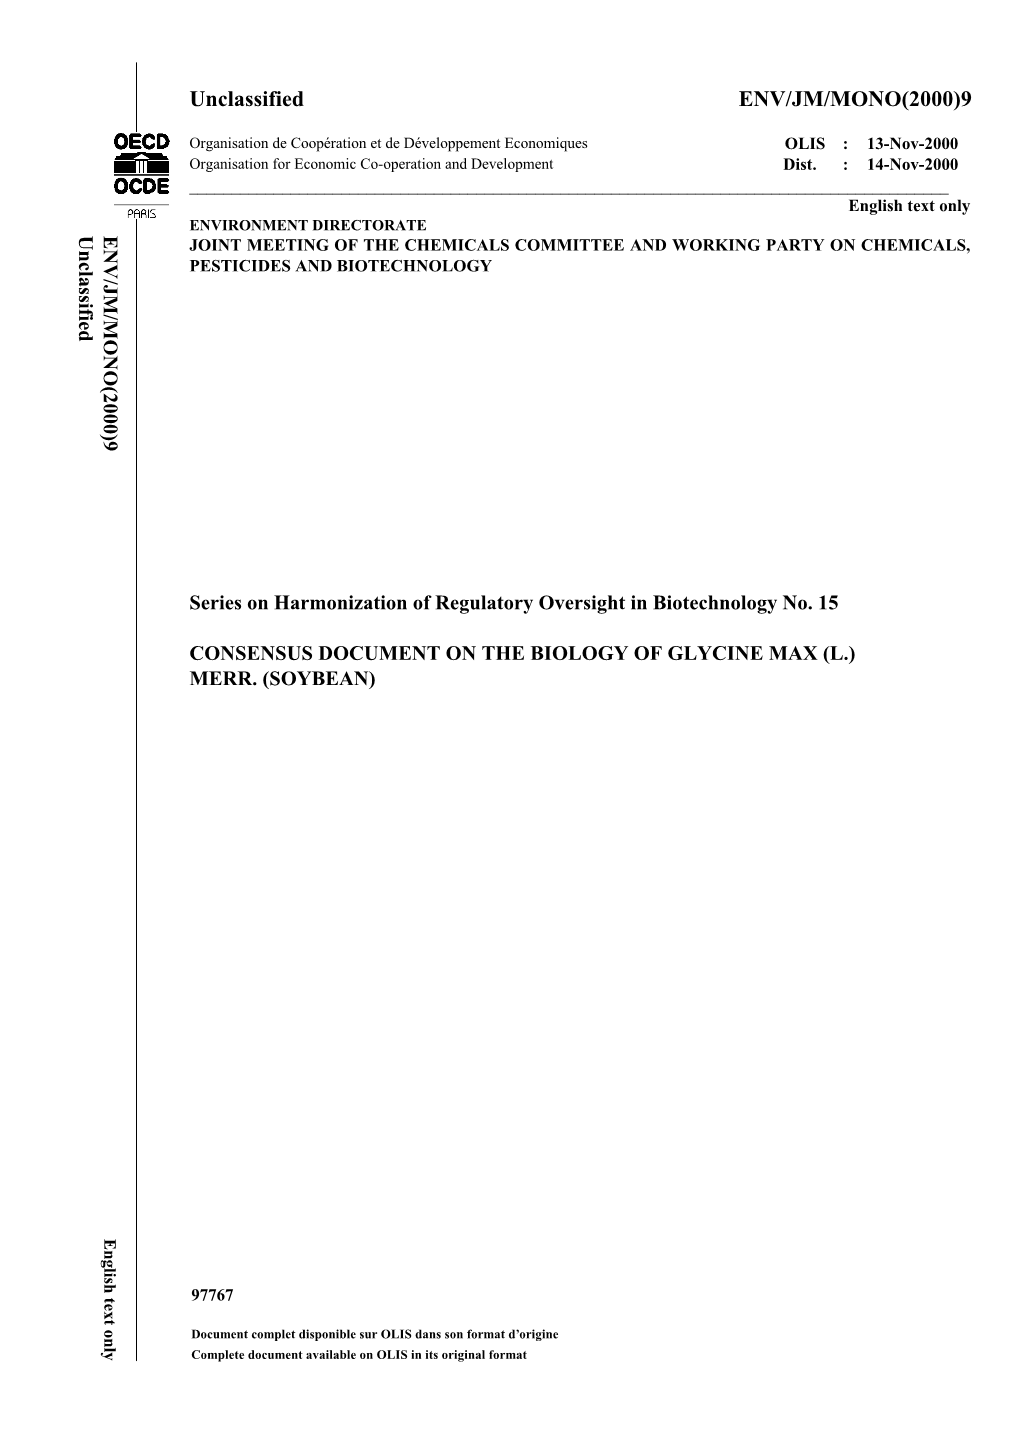 Consensus Document on the Biology of Glycine Max (L.) Merr